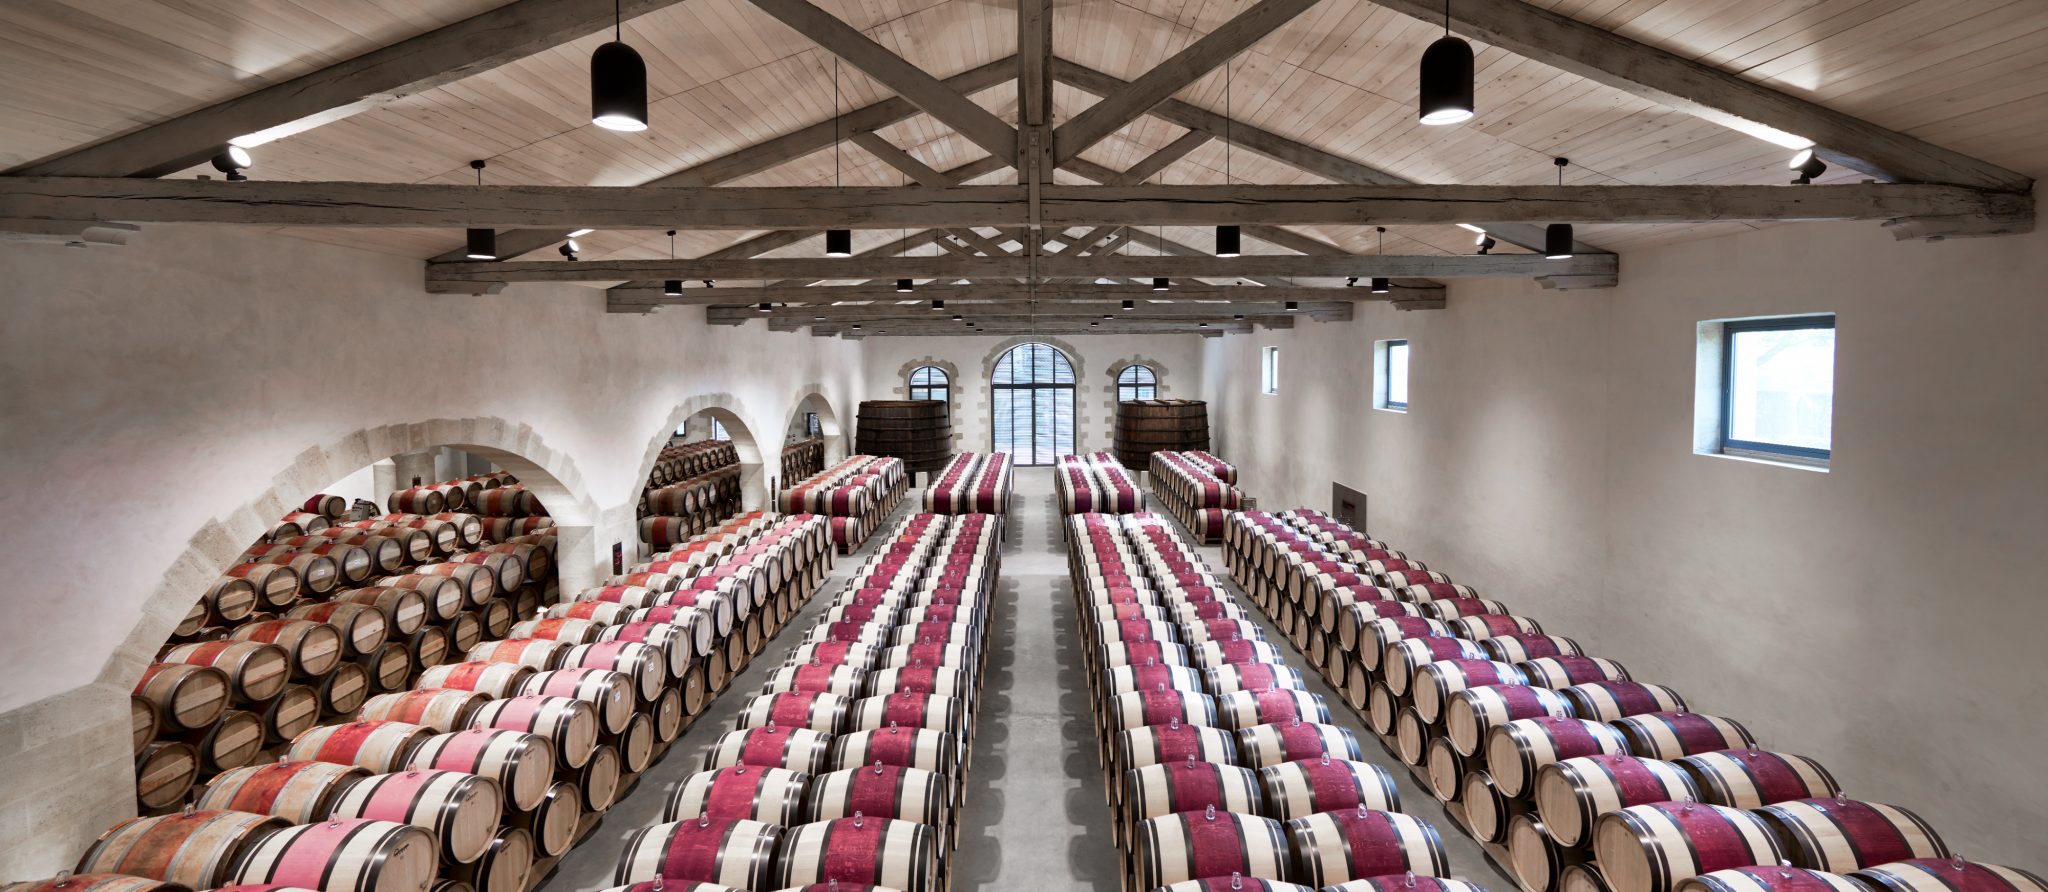 Large hall filled with wine barrels